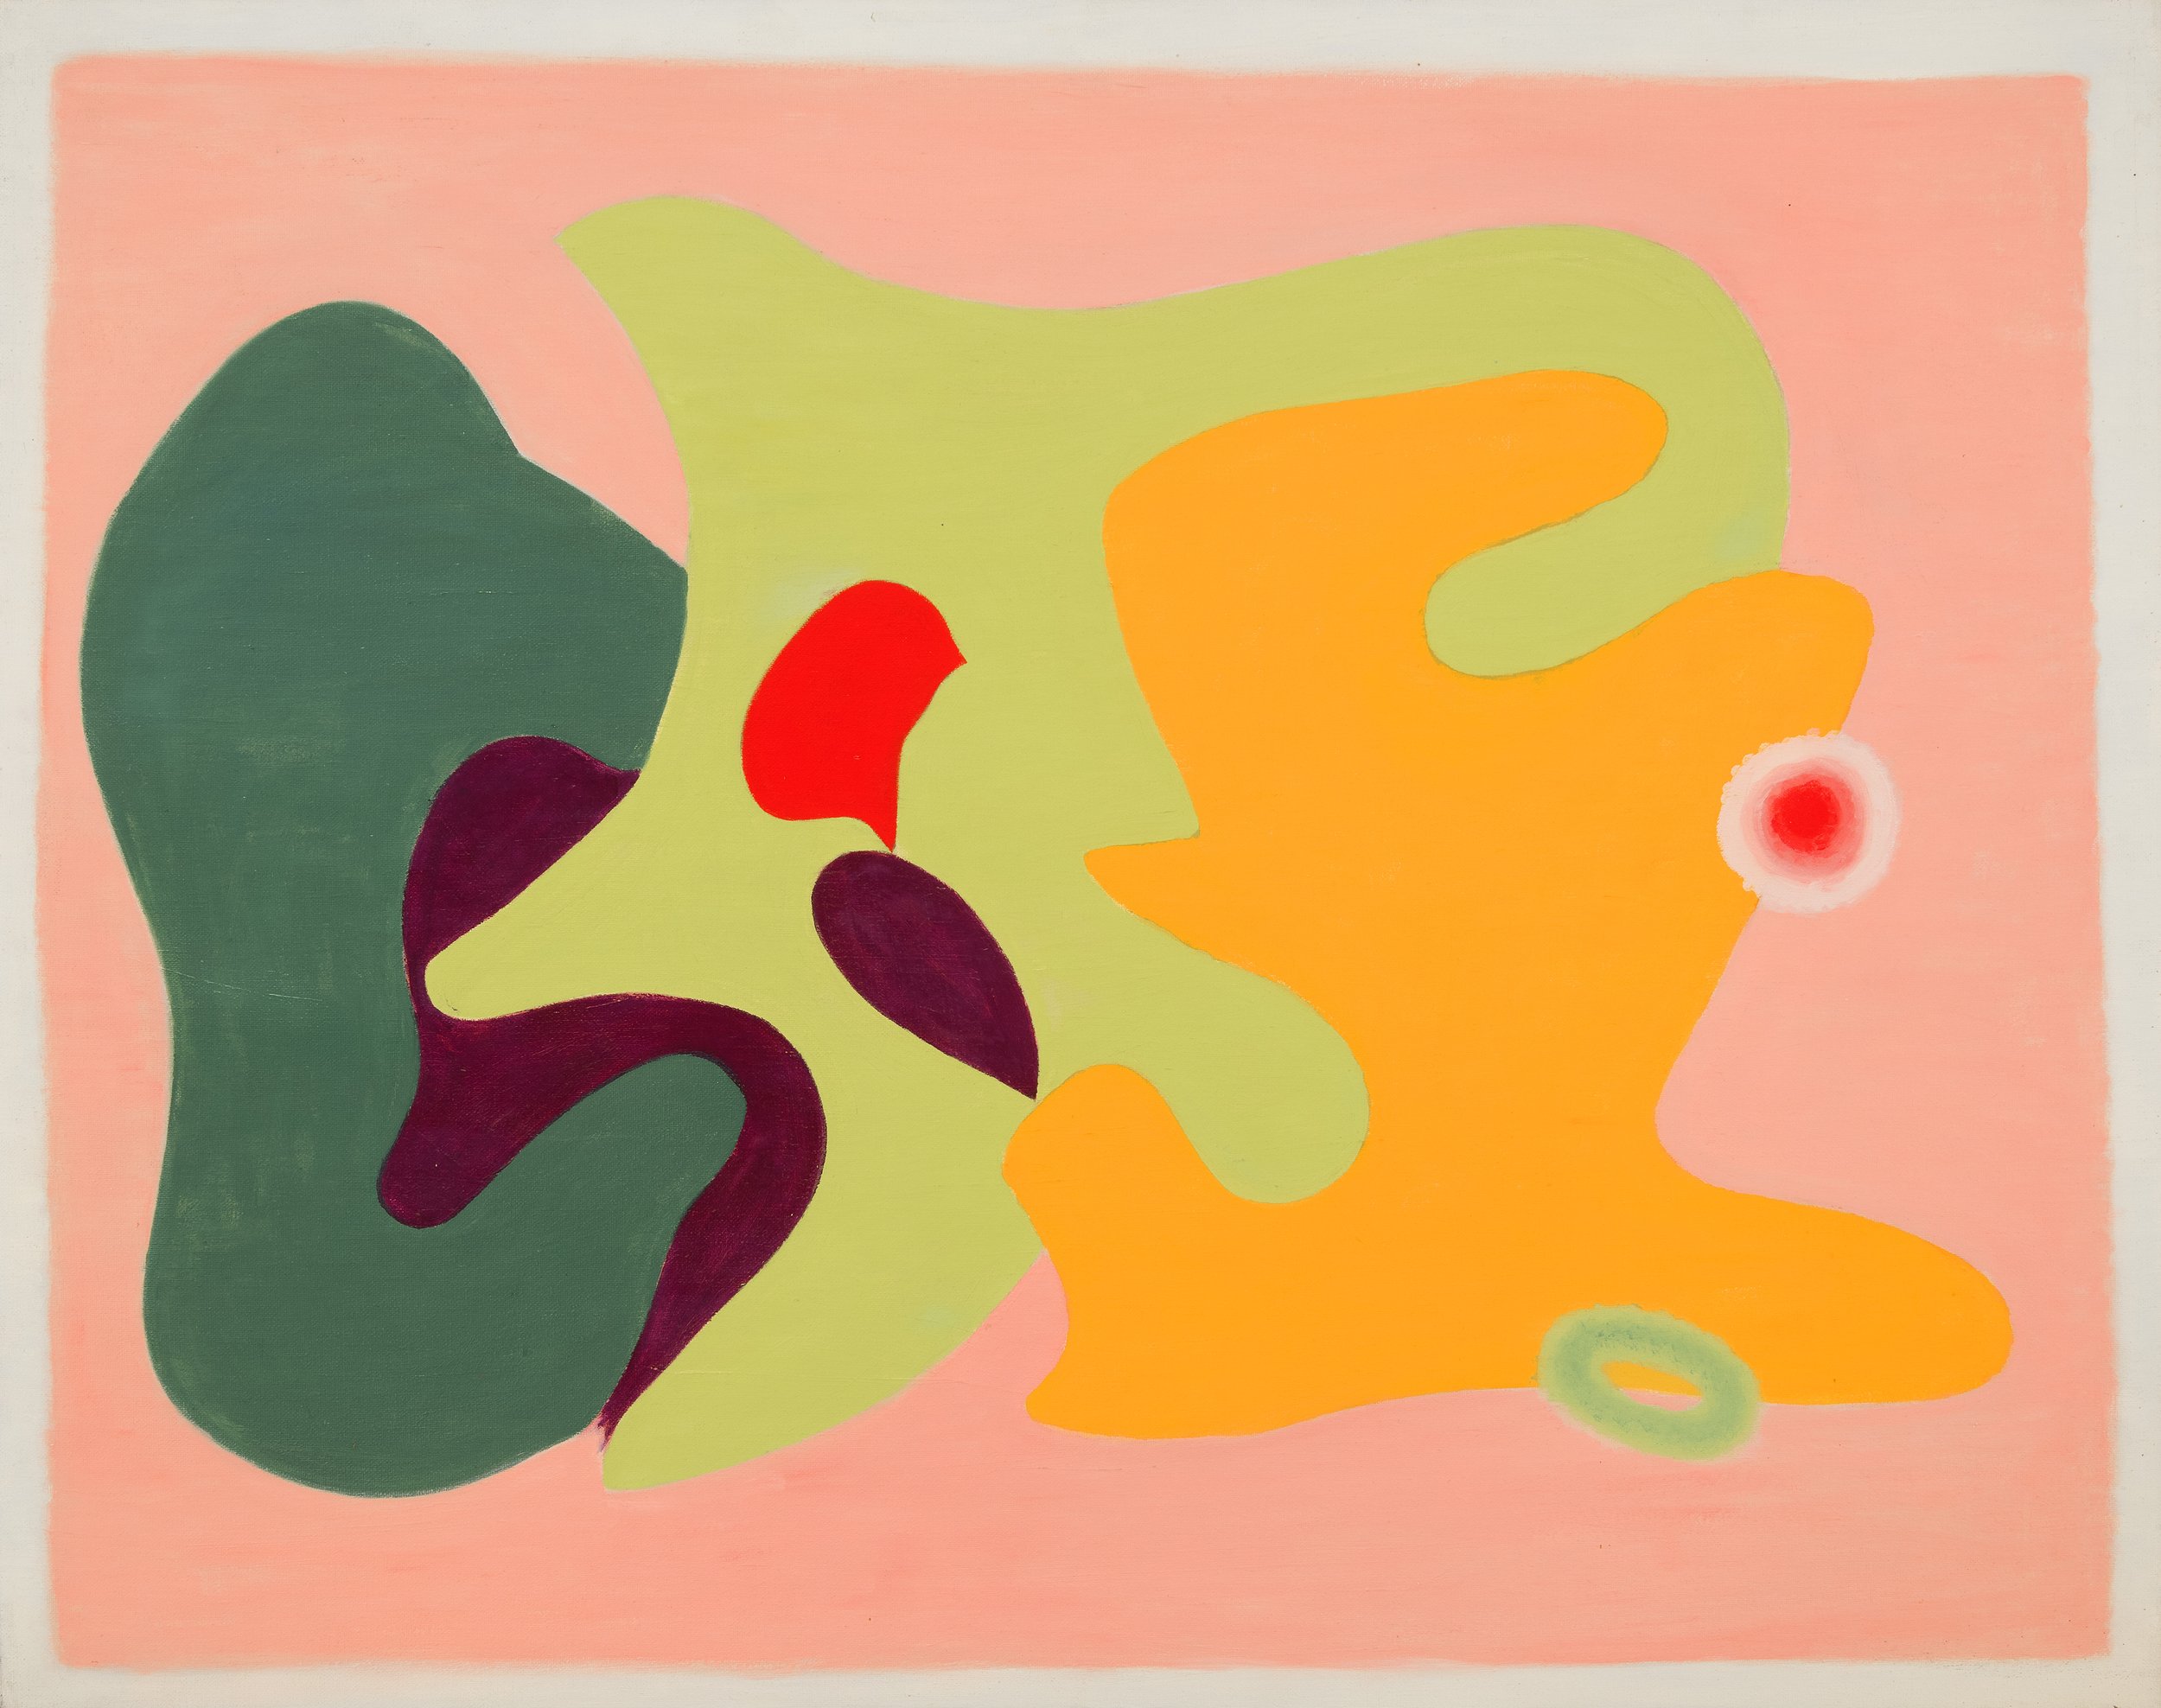 Flora Crockett &lt;alt: geometric abstract painting in peach, yellow, greens, and red&lt;/&gt;